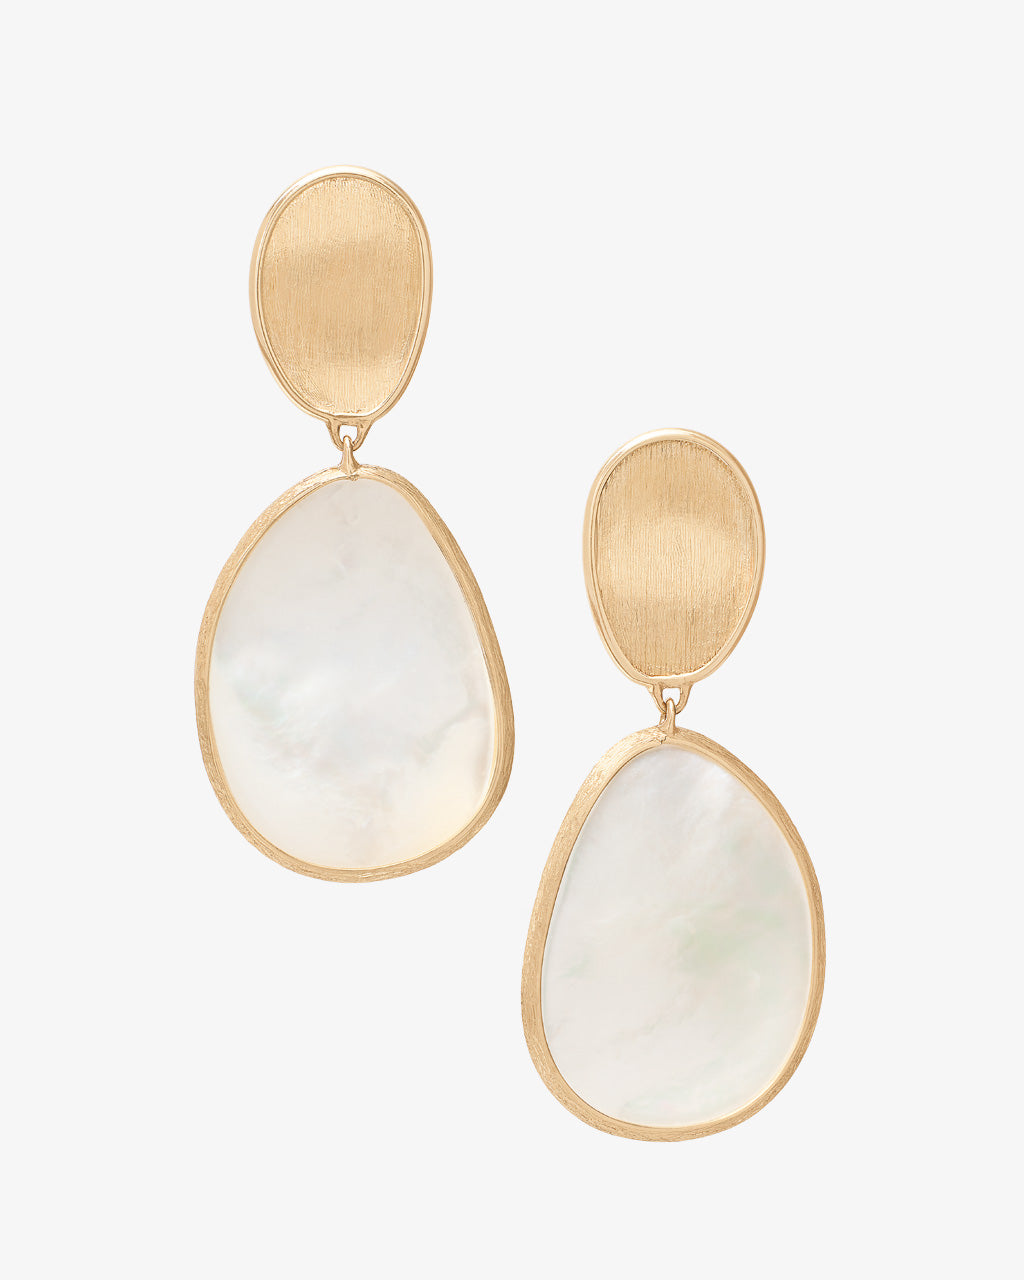 Marco Bicego Lunaria Collection Mother of Pearl Drop Earrings